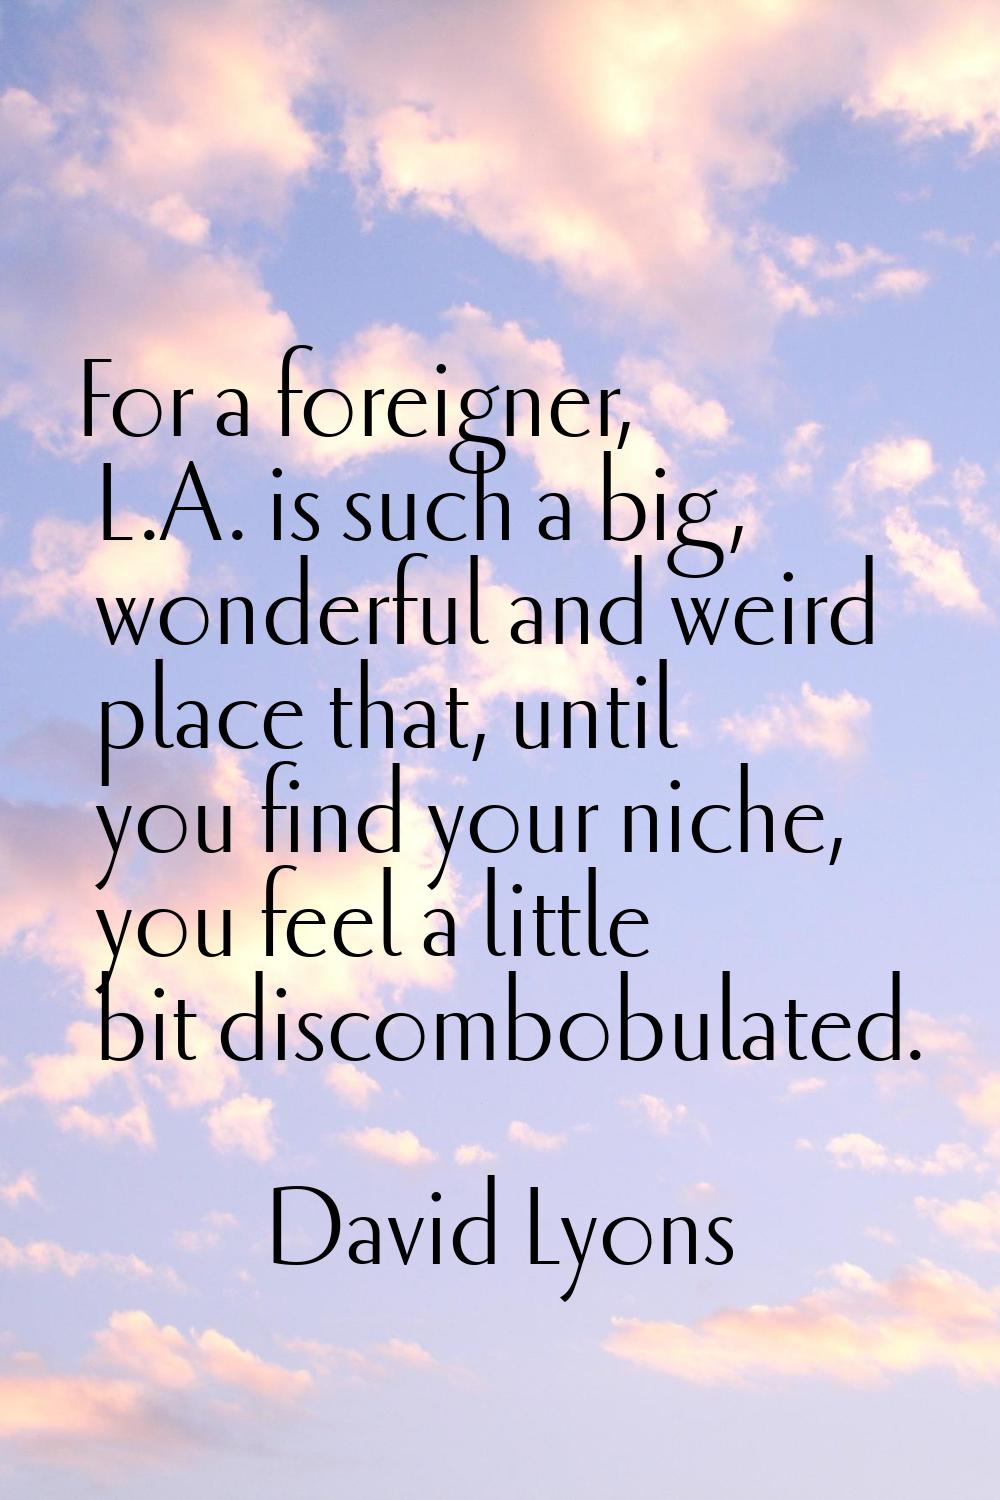 For a foreigner, L.A. is such a big, wonderful and weird place that, until you find your niche, you